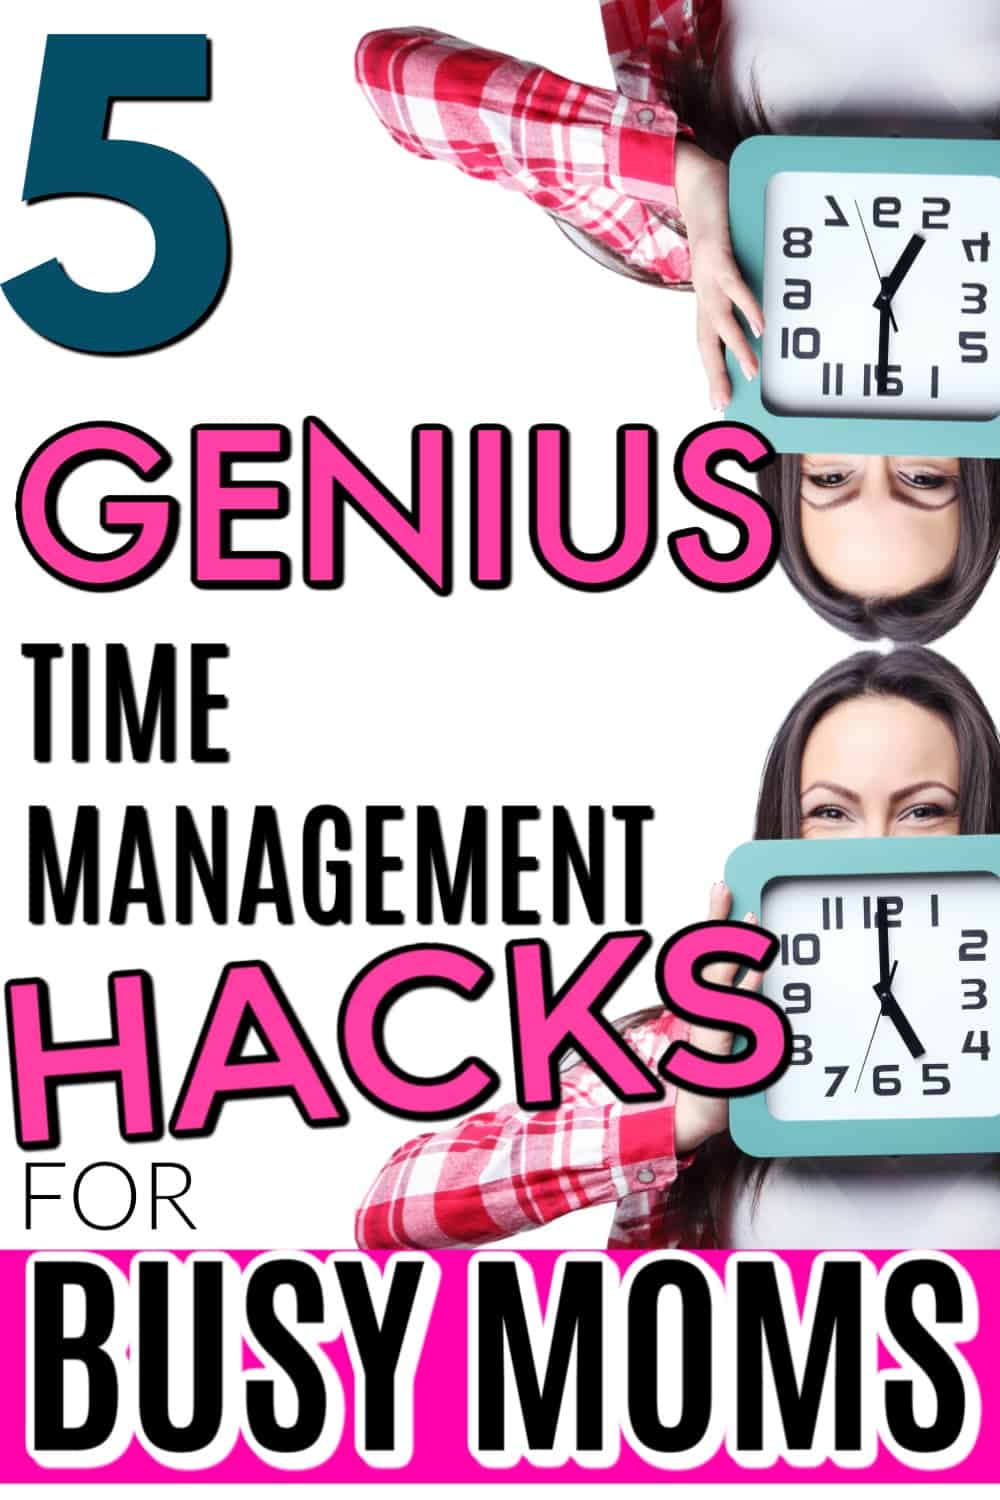 How to organize your day and get more done. Stop wasting time and actually be productive as a mom of little kids. Get more done in an easy, simple way. Learn the top secrets, the best tips, tricks, and hacks to time management and save time. 5 Best Time Management Hacks for Busy Moms. #timemanagement #productivity #mom